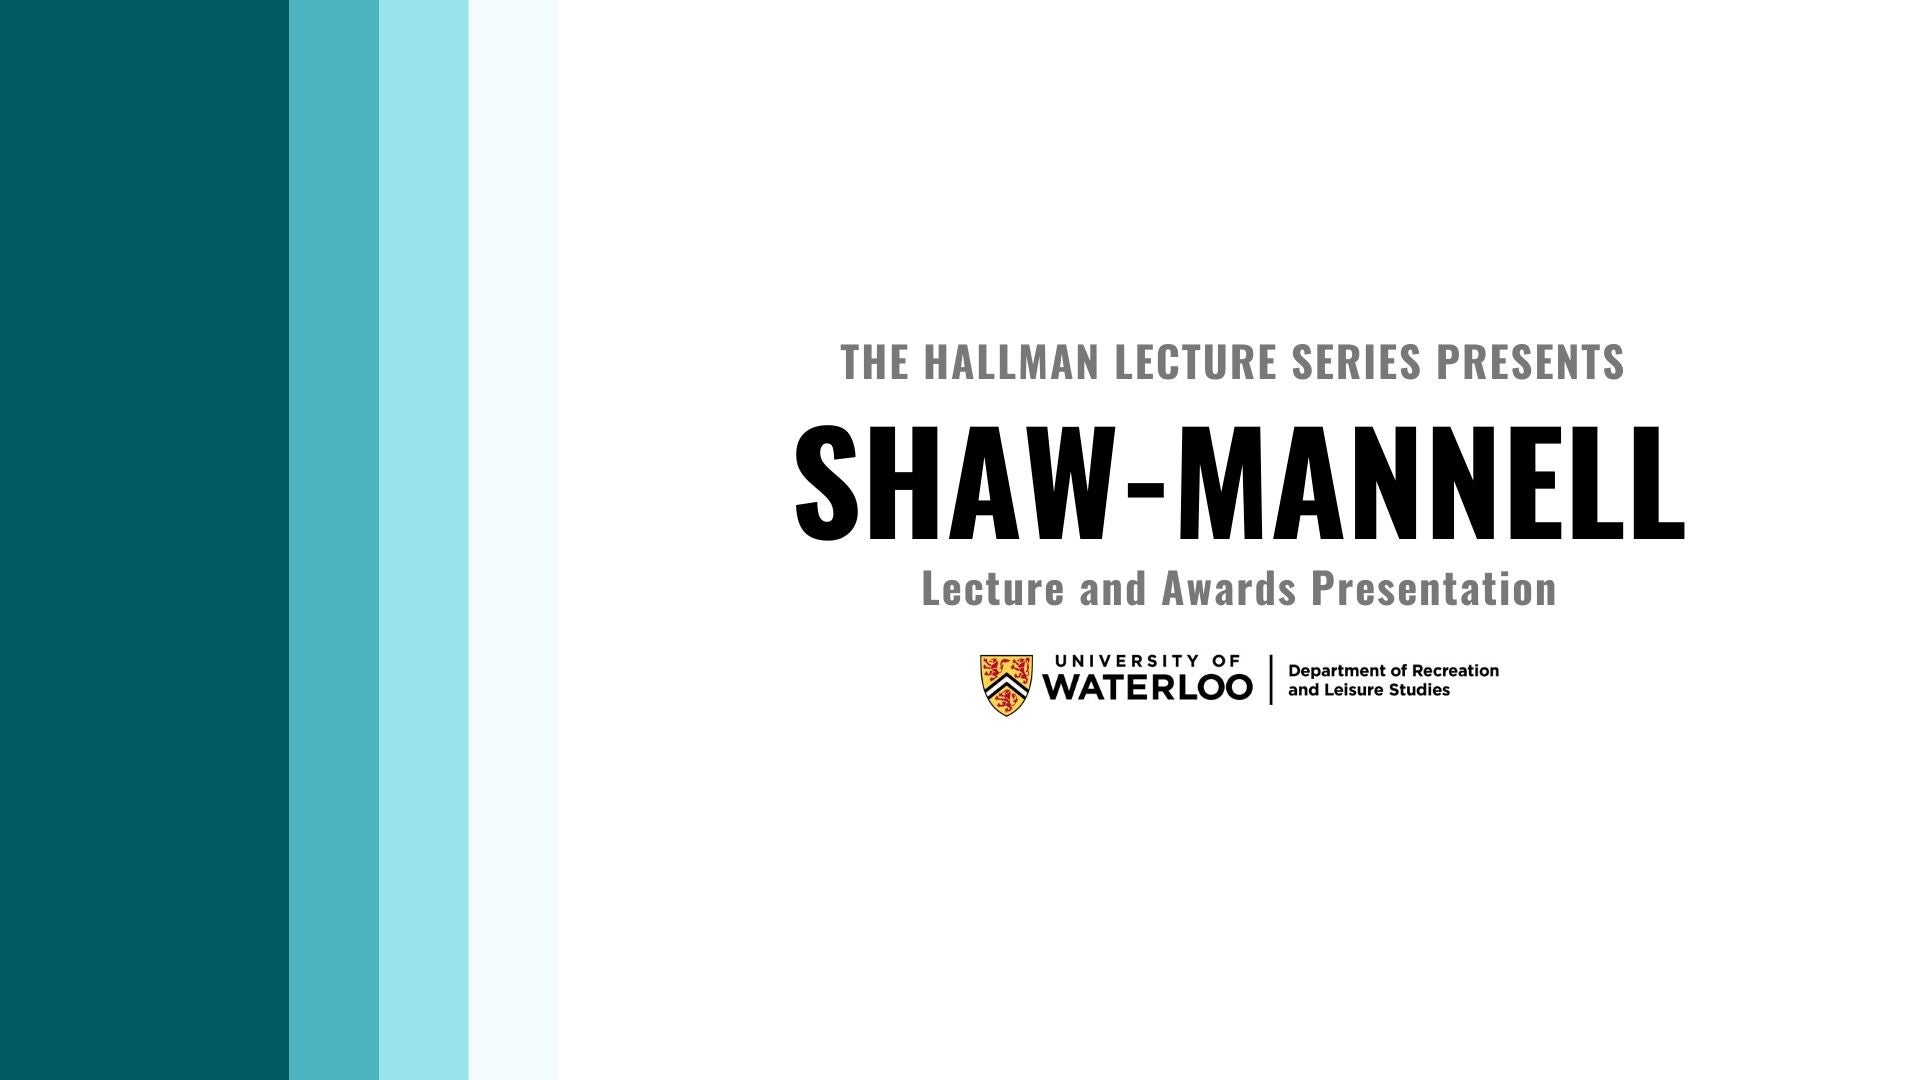 Hallman Lecture Series Presents Shaw-Mannell Lecture and Awards Presentation banner